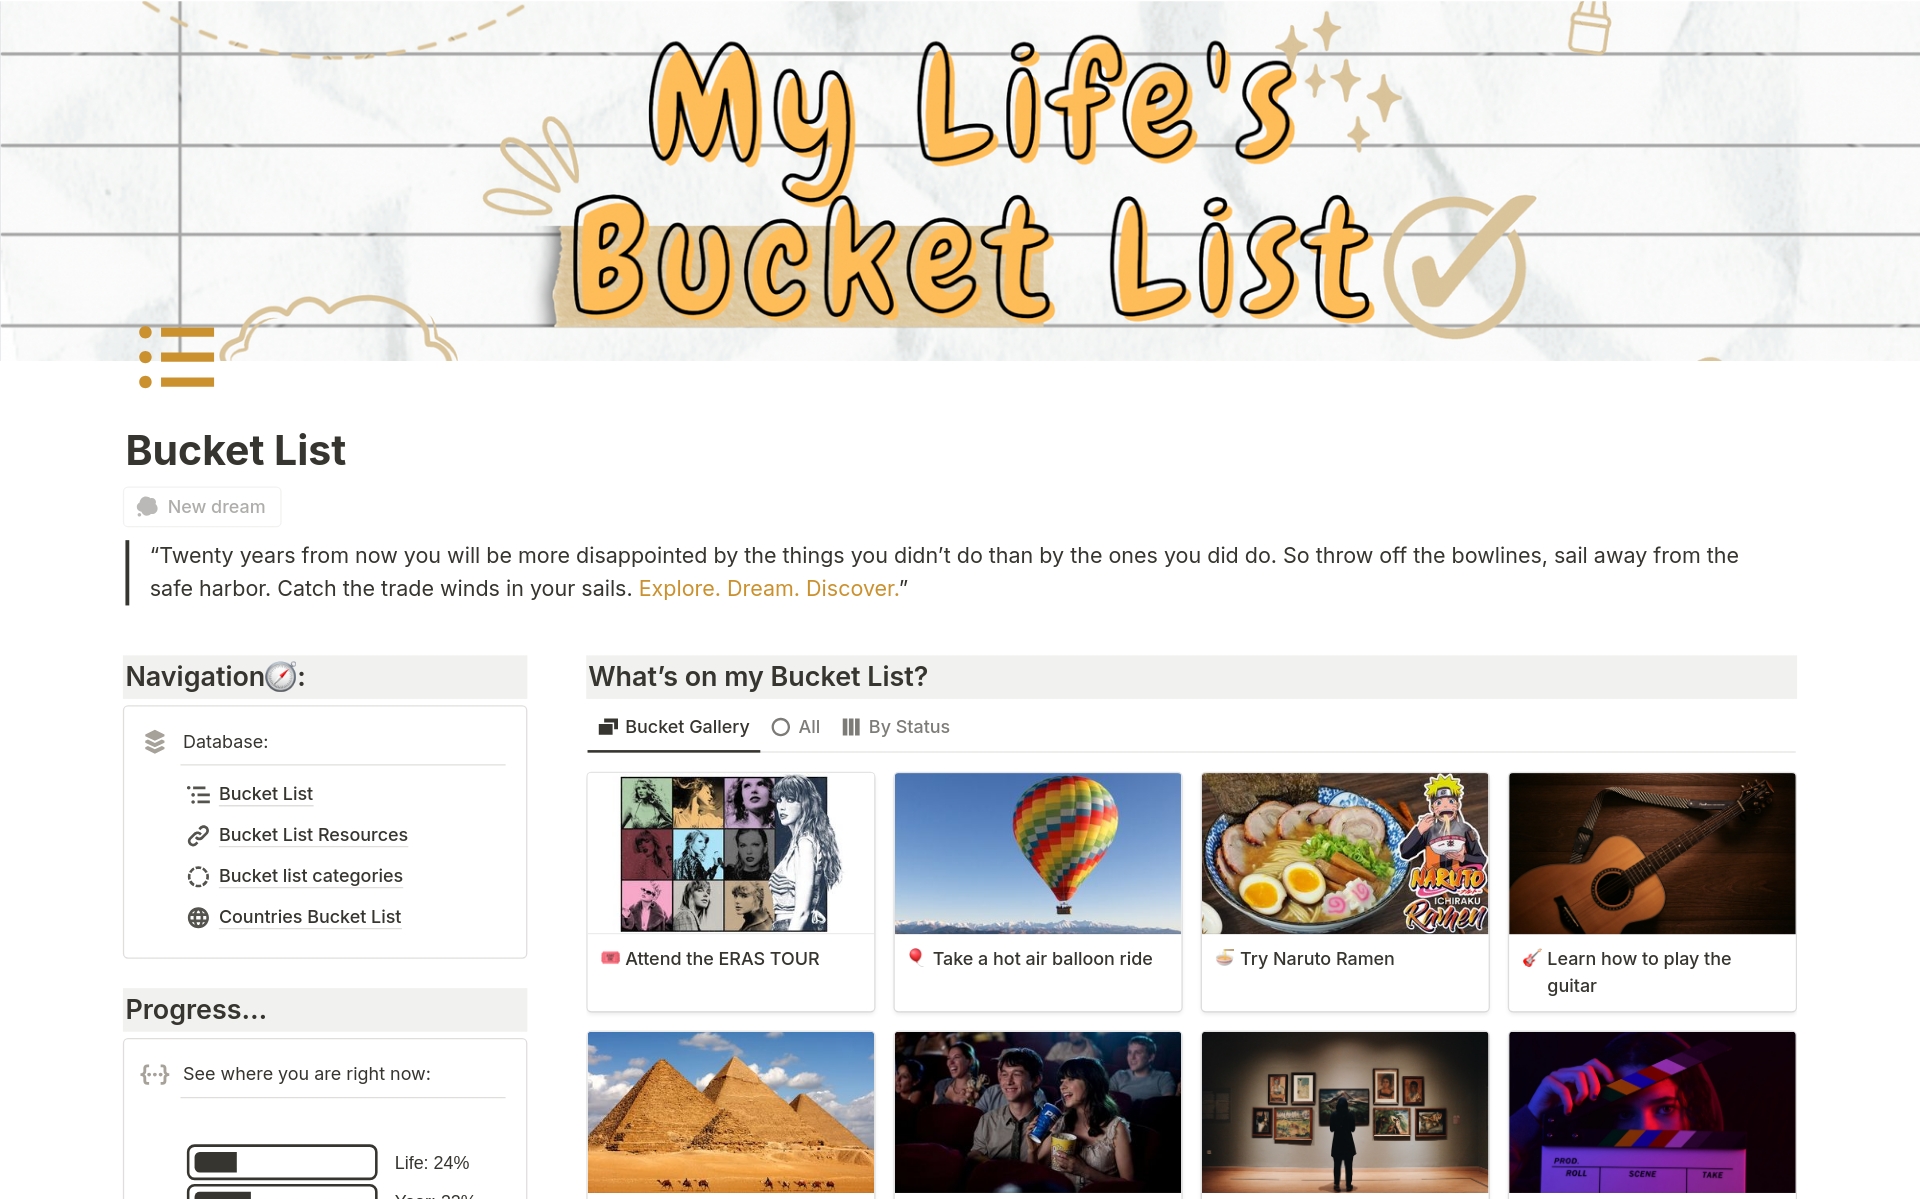 Ready to turn your wildest dreams into reality? Our bucket list template is your passport to endless adventures! Explore global destinations, organize your passions, track your progress, and fuel your creativity. Start living your dream life today! 🌍✨🚀